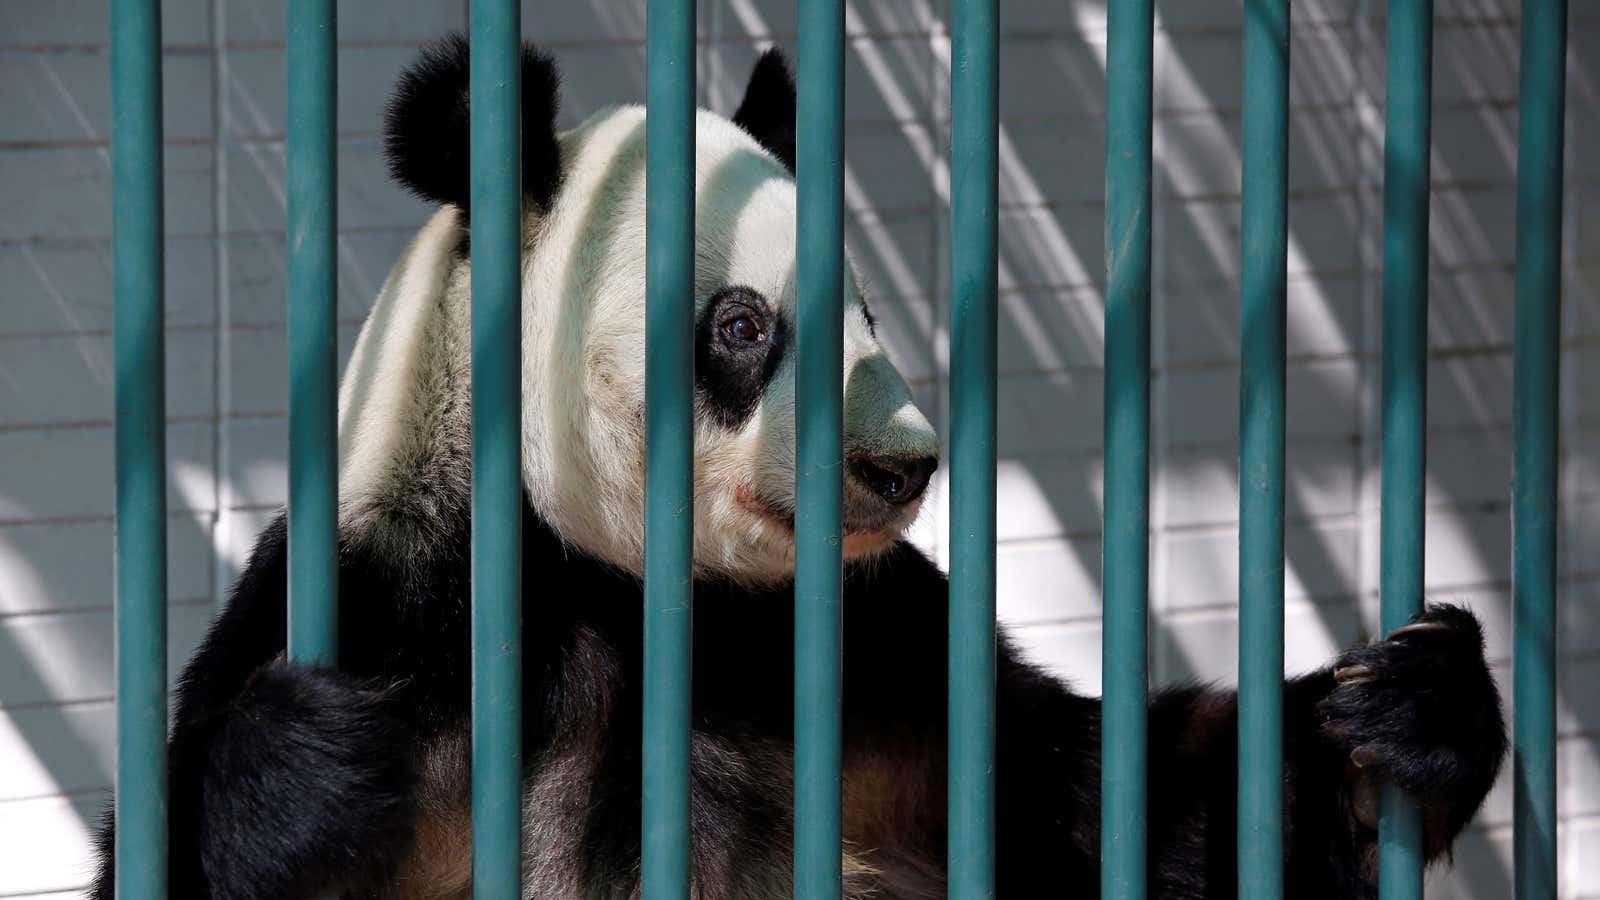 When is a 'panda' not a panda – and are any pandas actually bears?